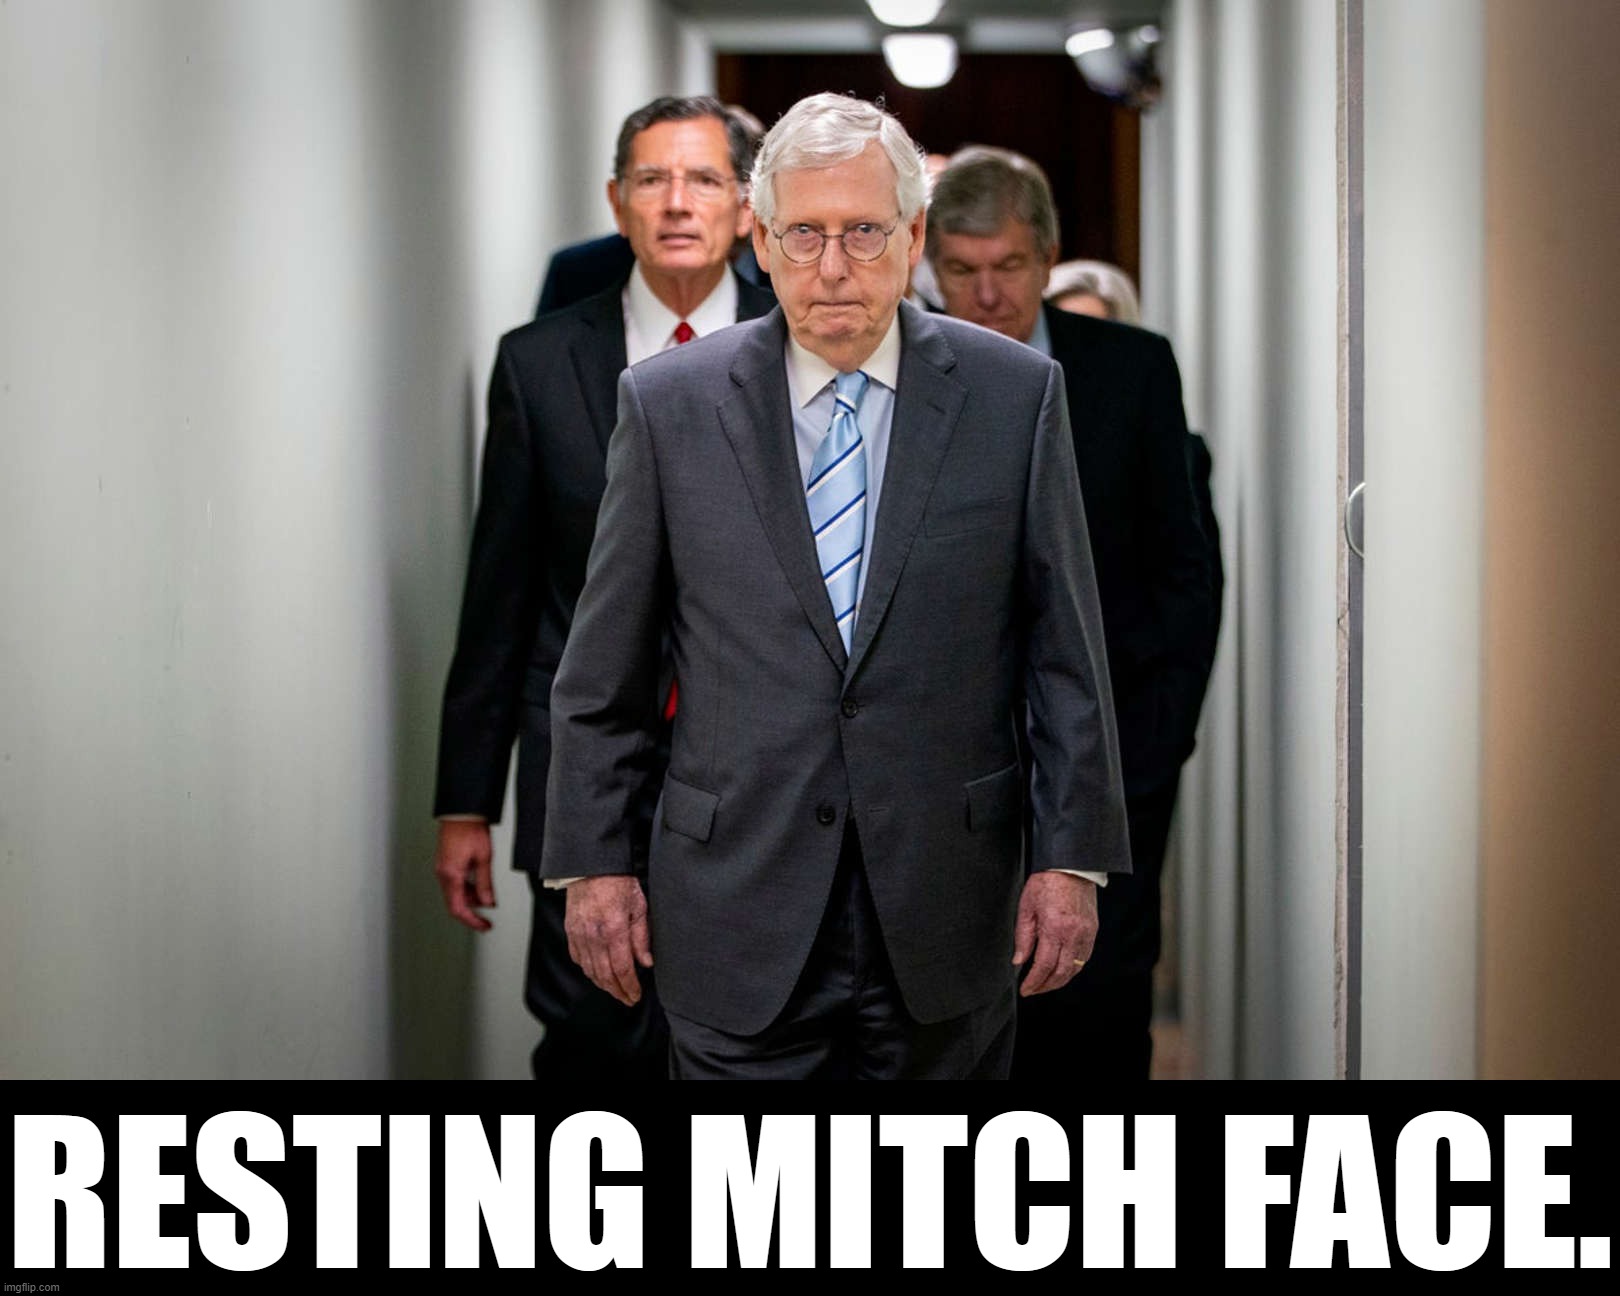 More RMF. | RESTING MITCH FACE. | image tagged in resting mitch face,resting,mitch,face,mitch mcconnell,republicans | made w/ Imgflip meme maker